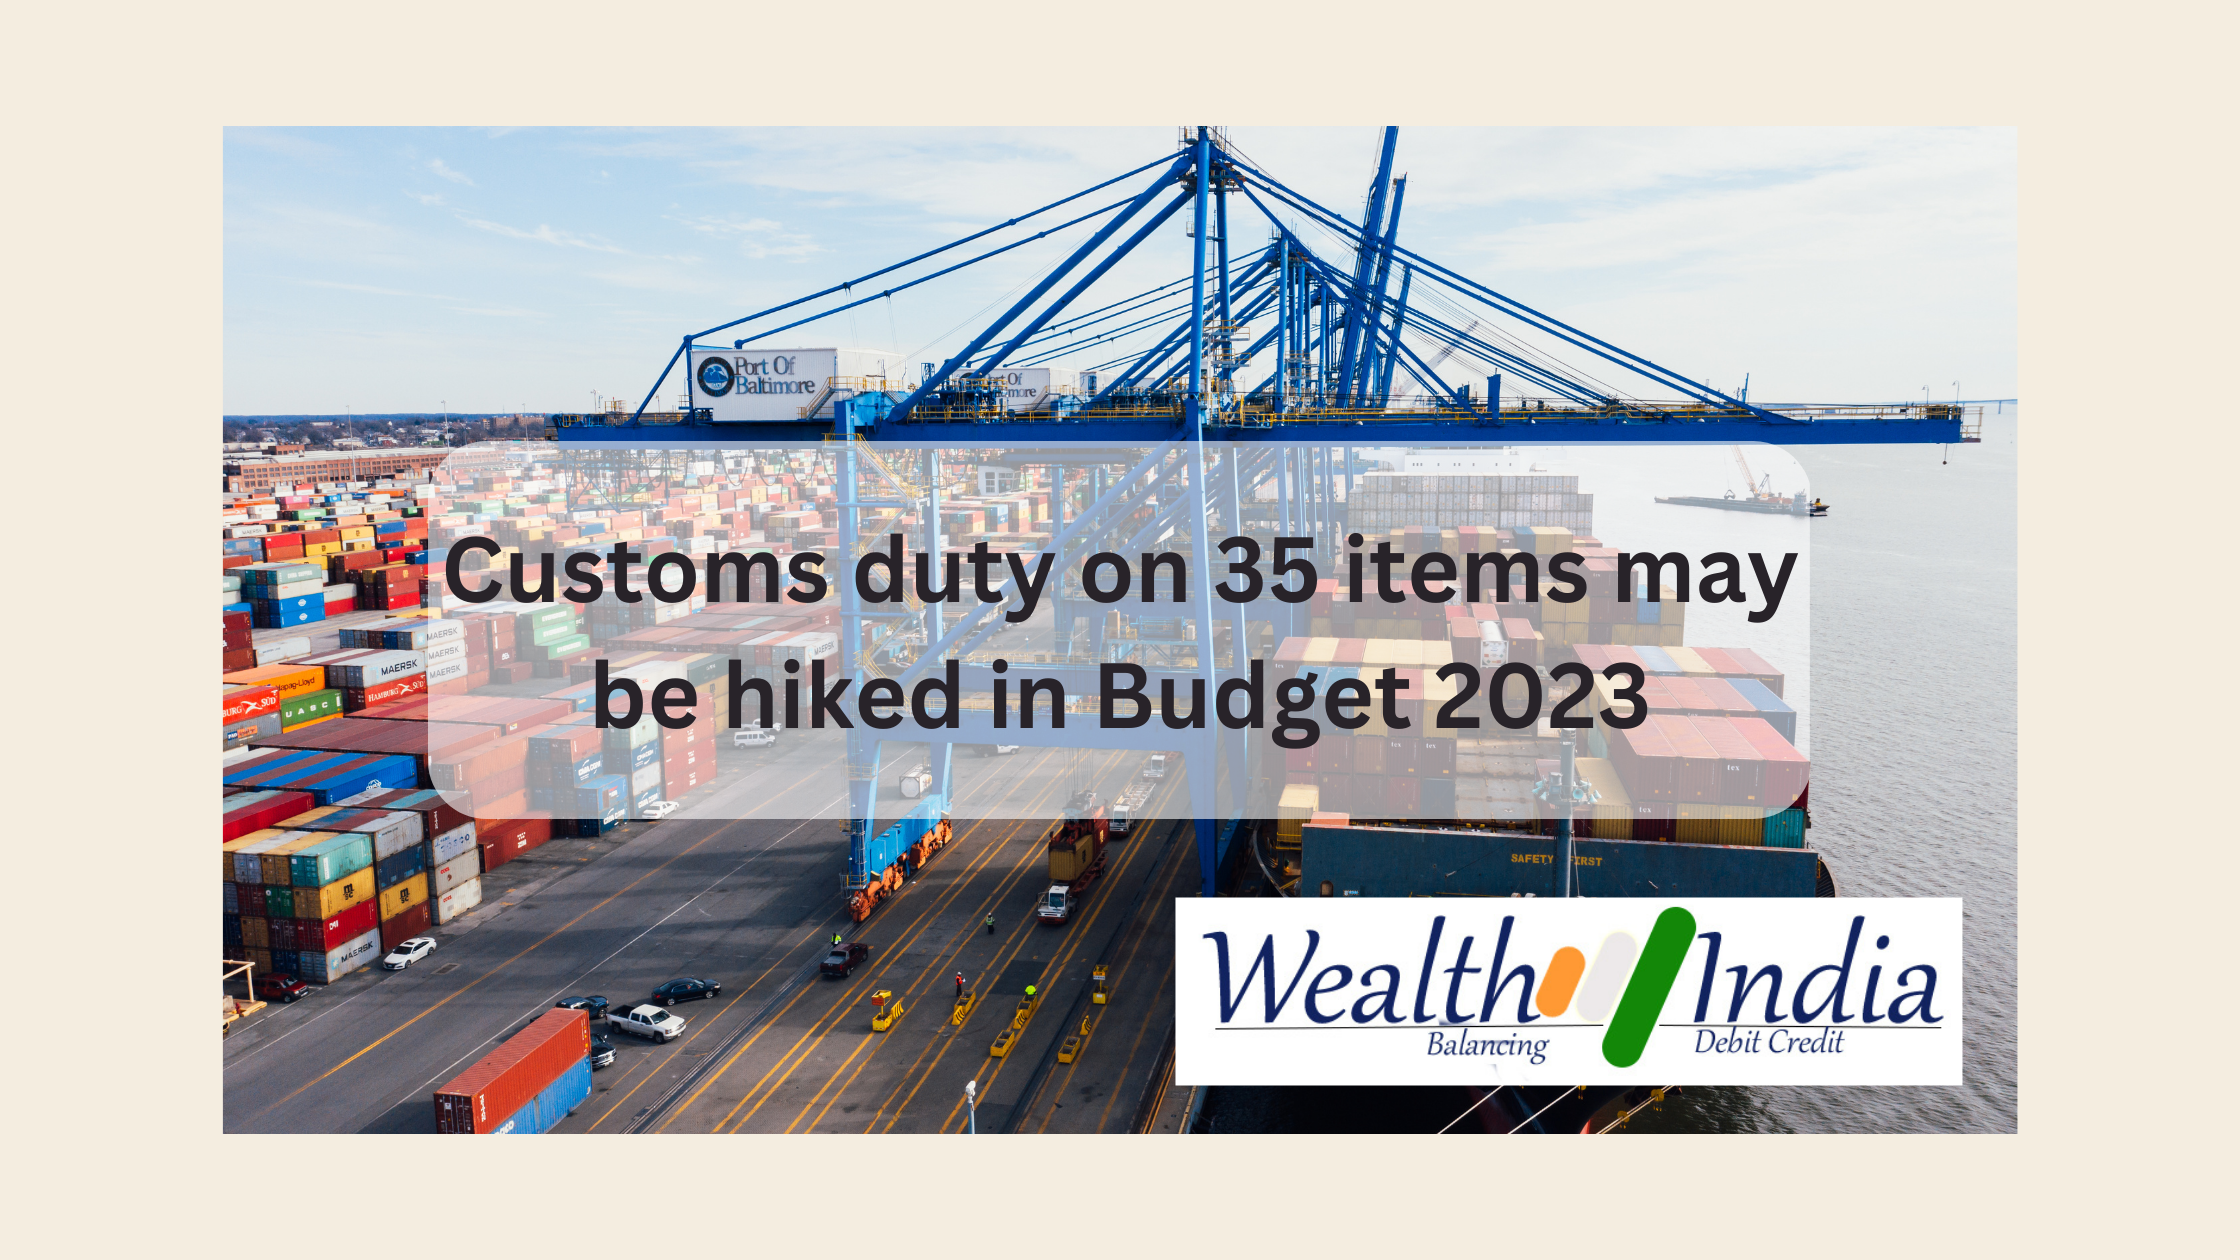 Customs duty on 35 items may be hiked in Budget 2023